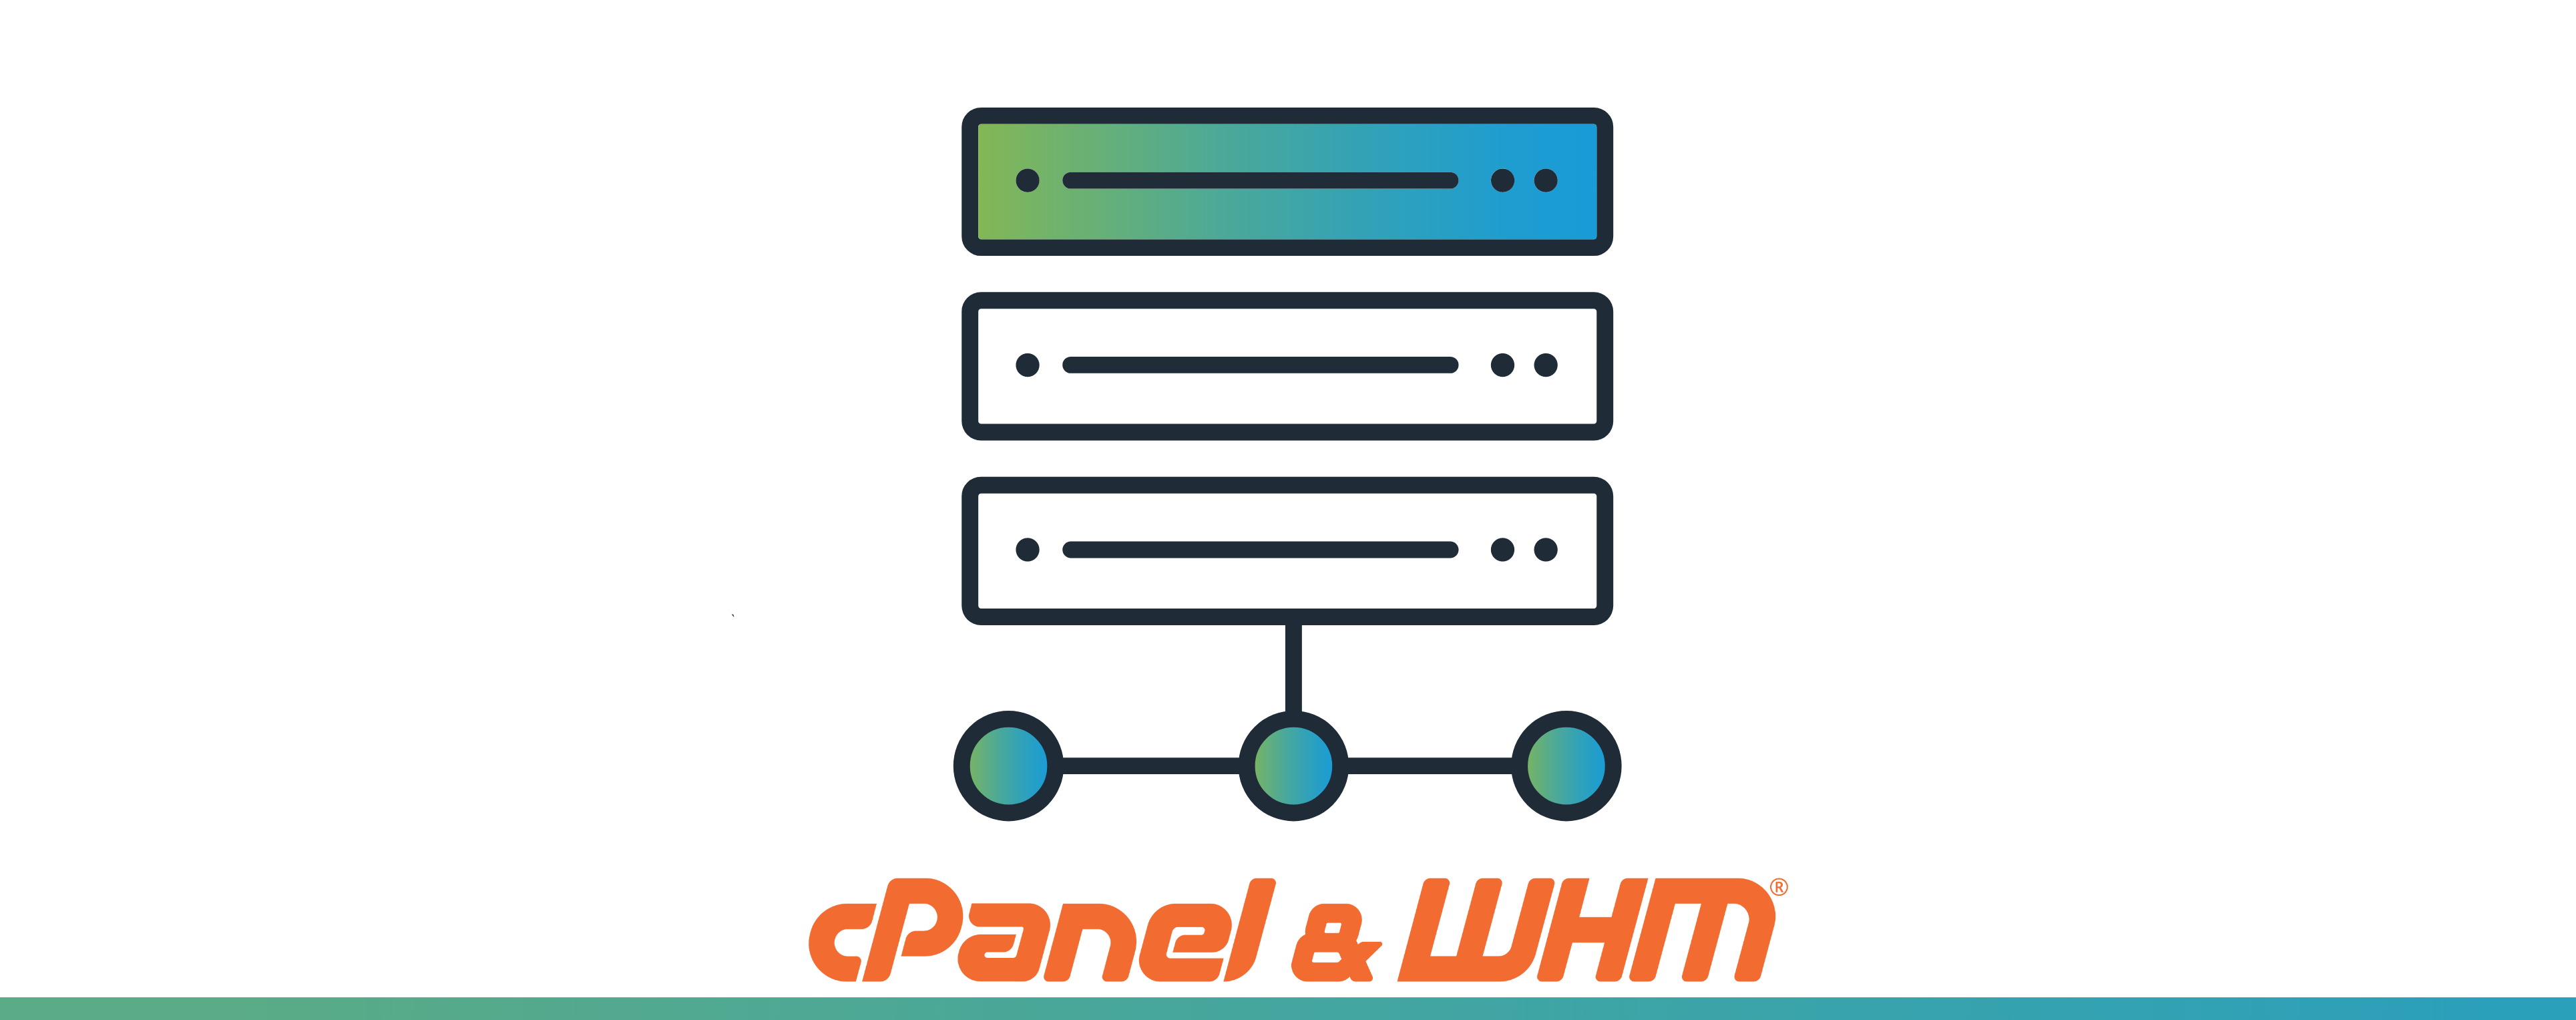 the-cpanel-mail-server-cpanel-eats-its-own-dog-food